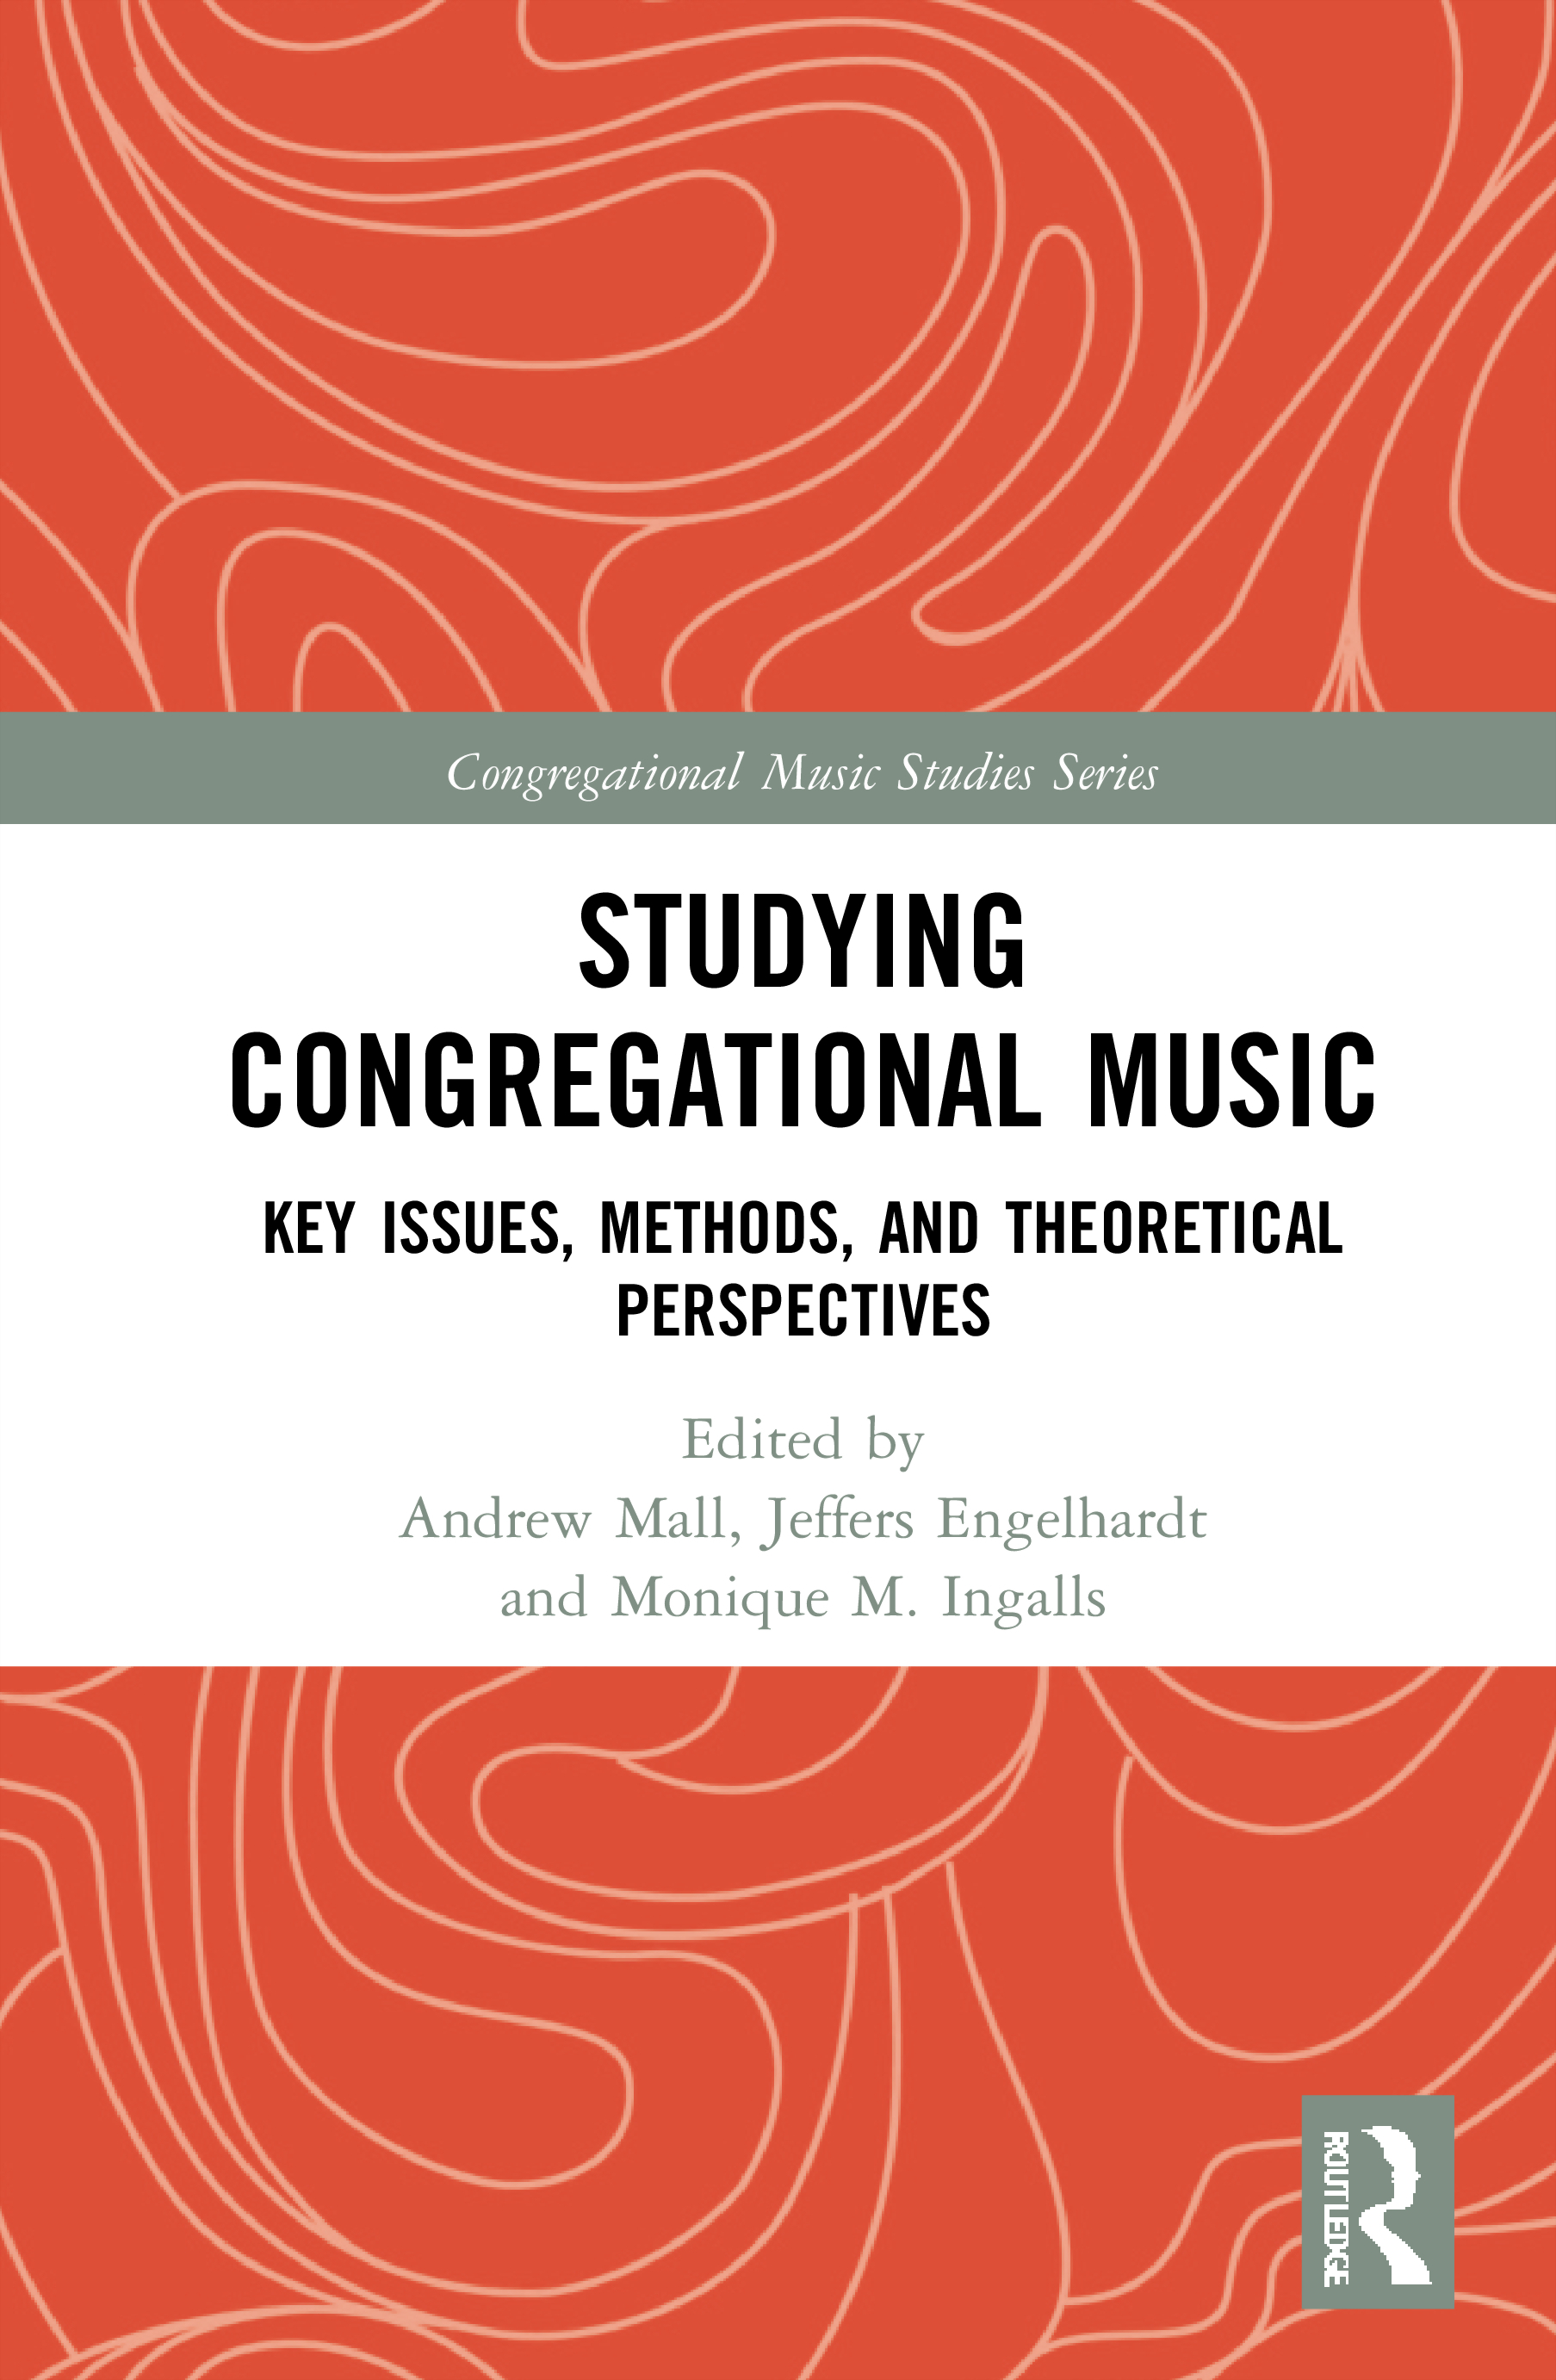 Book Cover: Congregational Music Studies Series